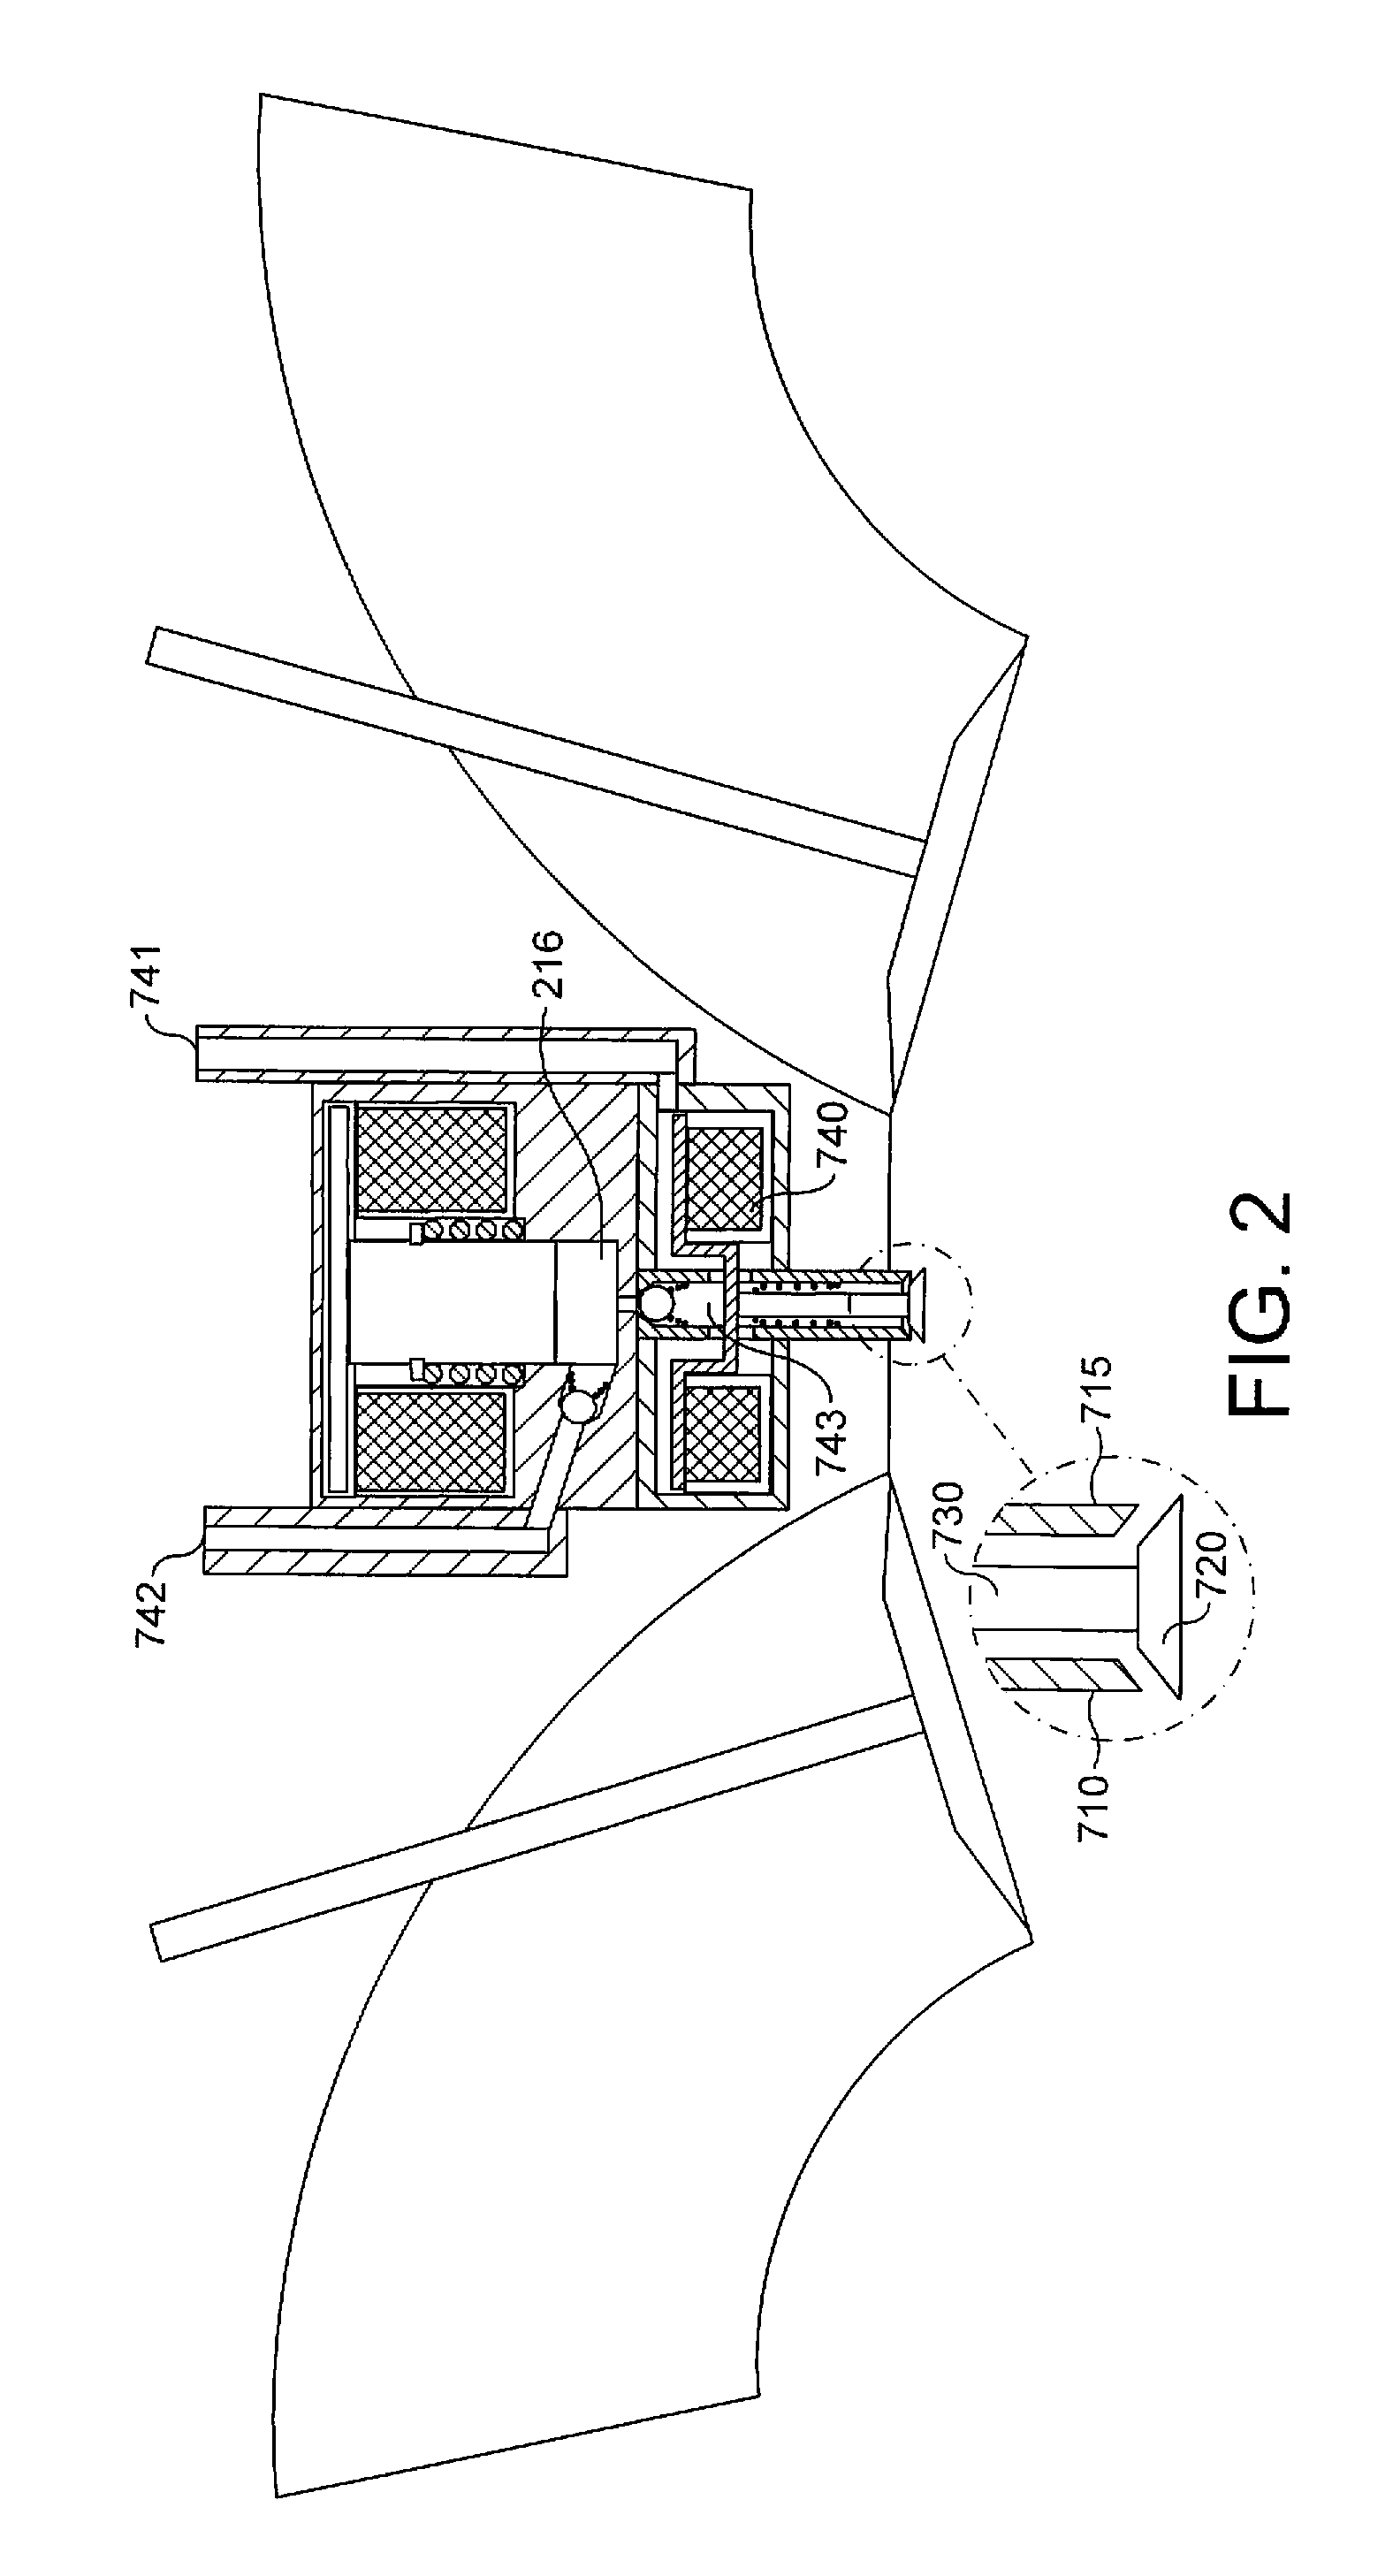 Internal combustion engine having a fuel injection system